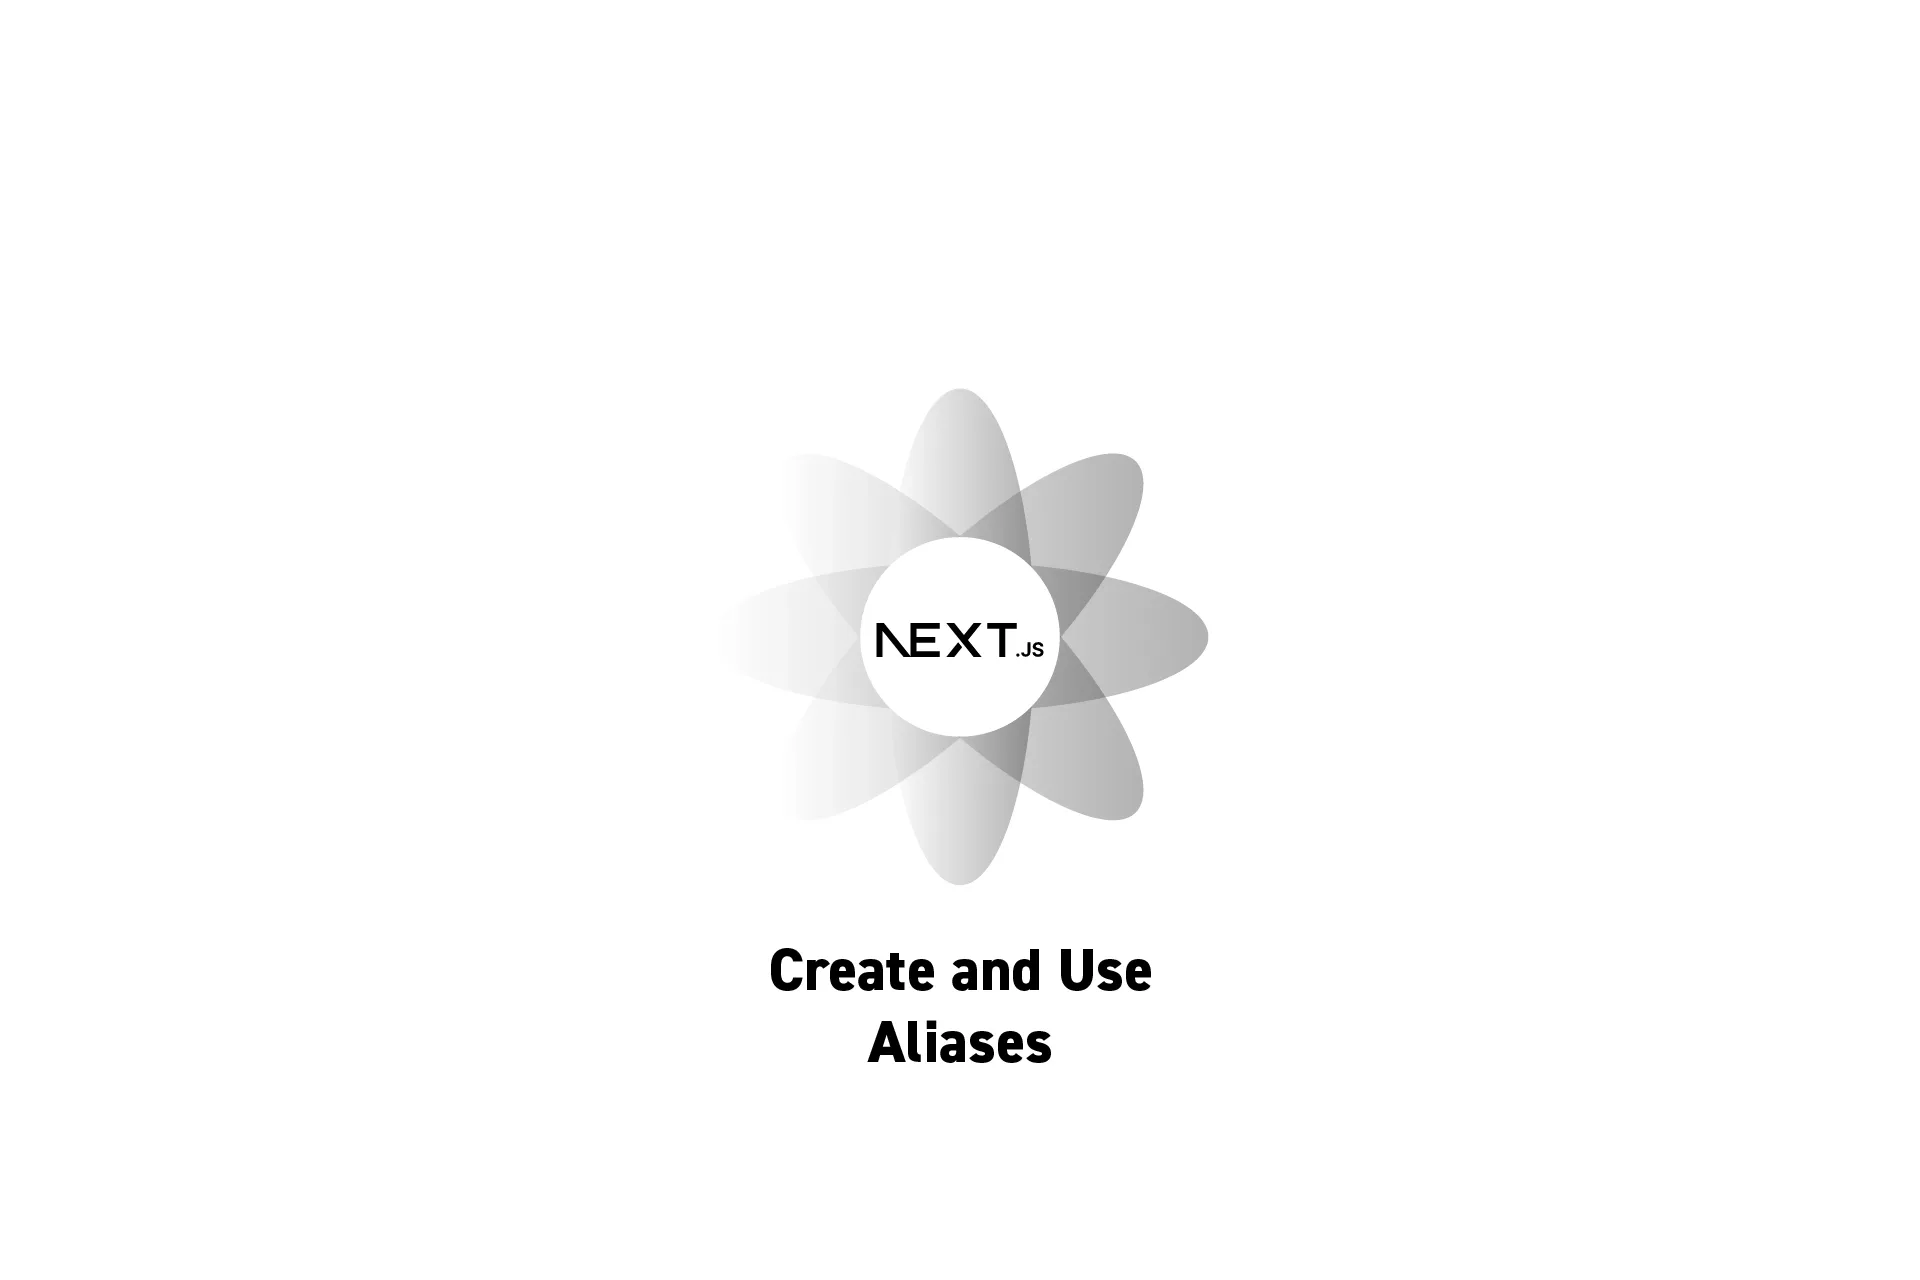 
<p>A flower that represents NextJS with the text "Create and Use Aliases” beneath it.</p>
<p></p>